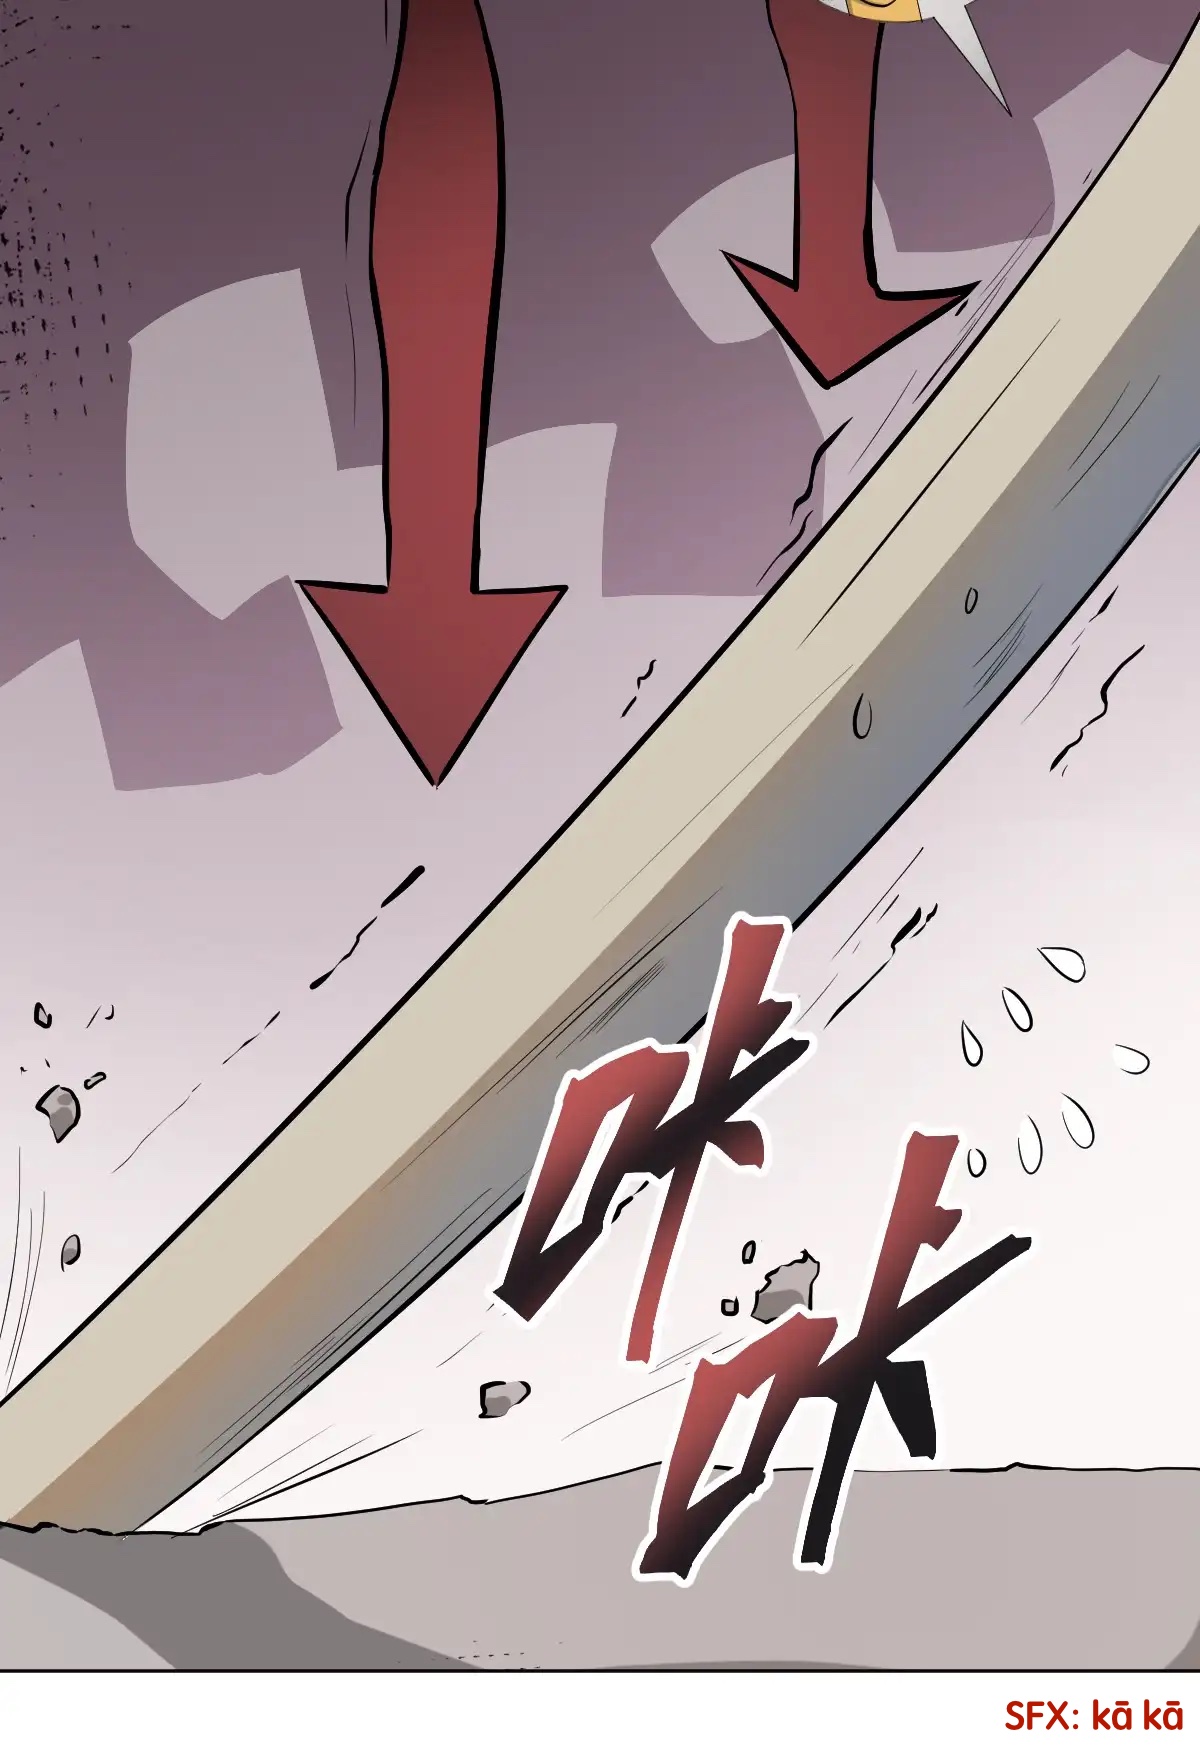 Little Skeleton Ch. 5 This sword is talking in human language!